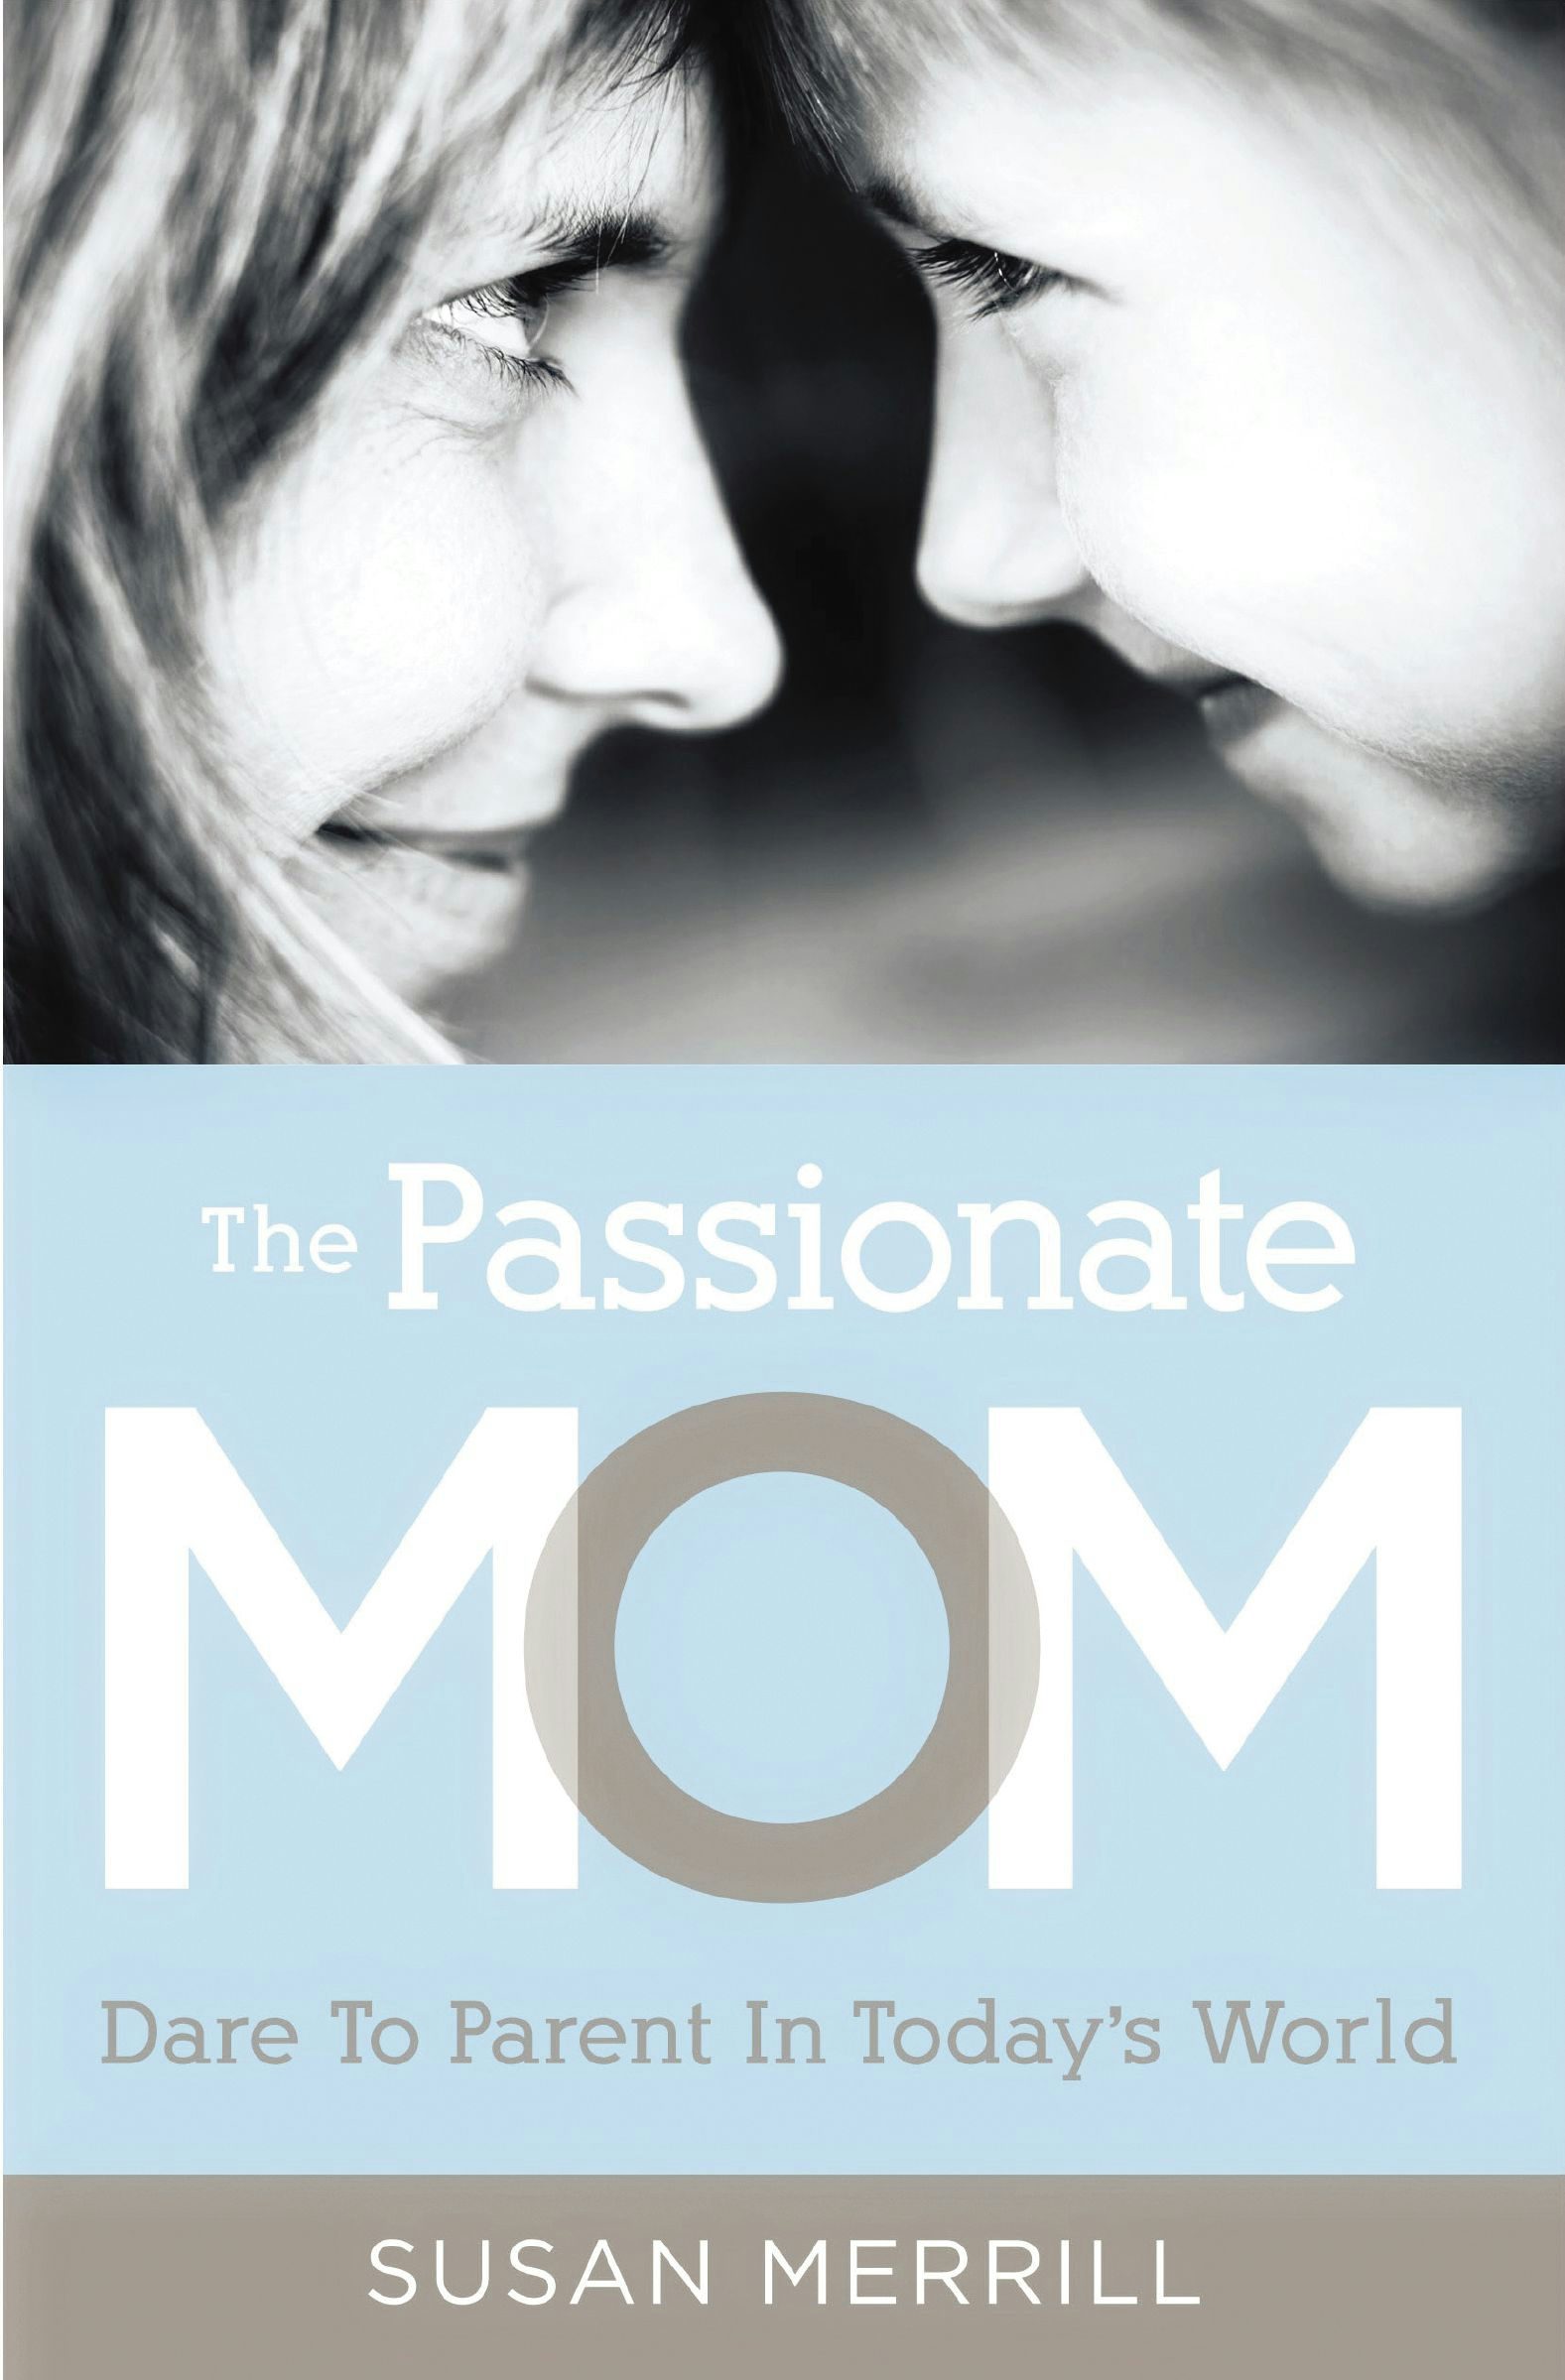 Passionate mother